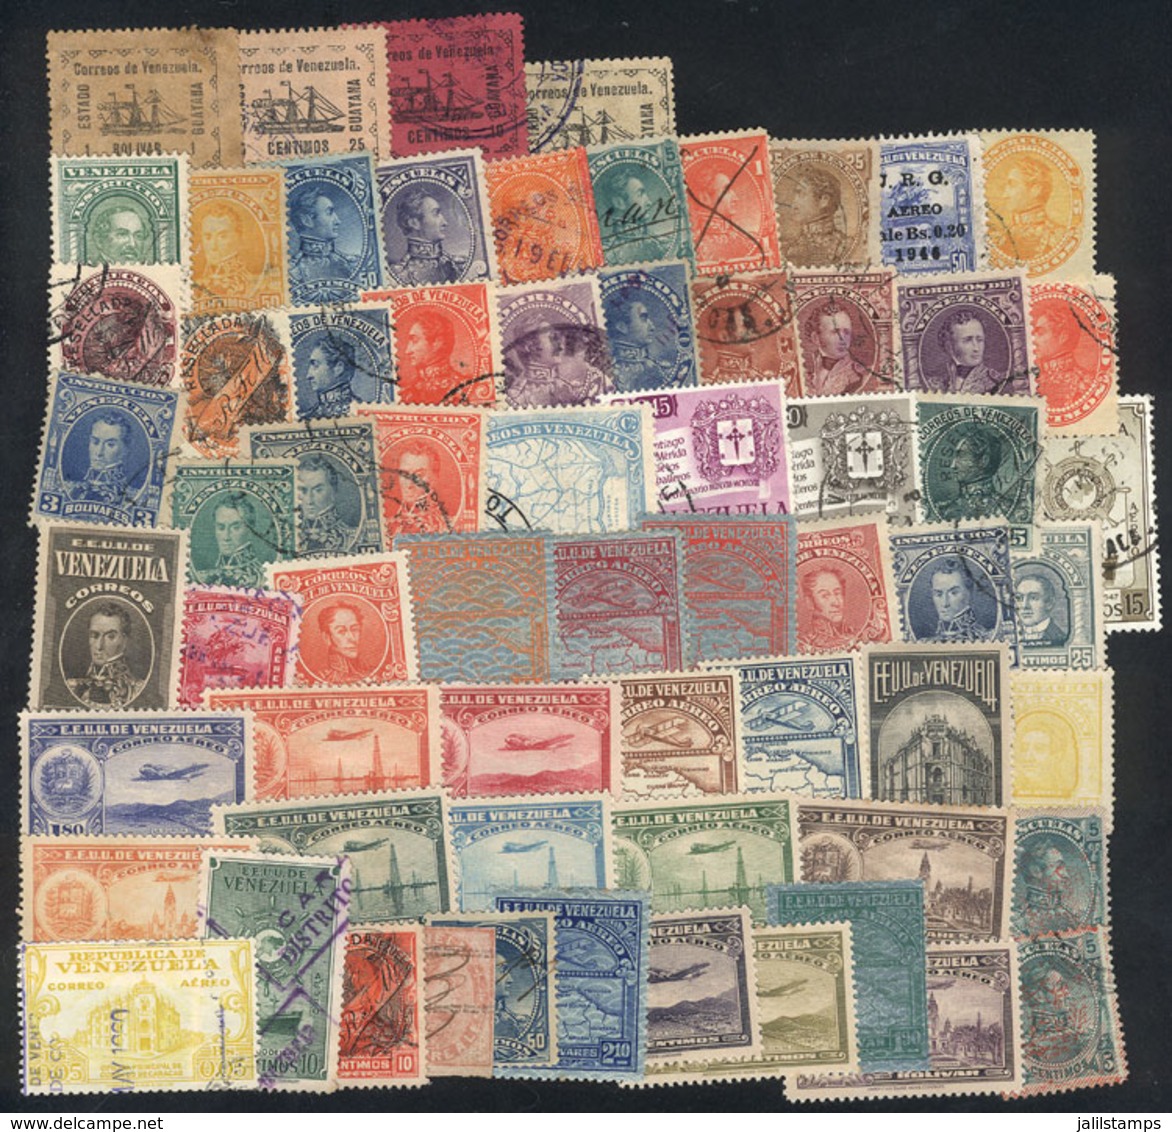 971 VENEZUELA: Lot Of Old Stamps, It May Include High Values Or Good Cancels (completely Unchecked), Very Fine General Q - Venezuela